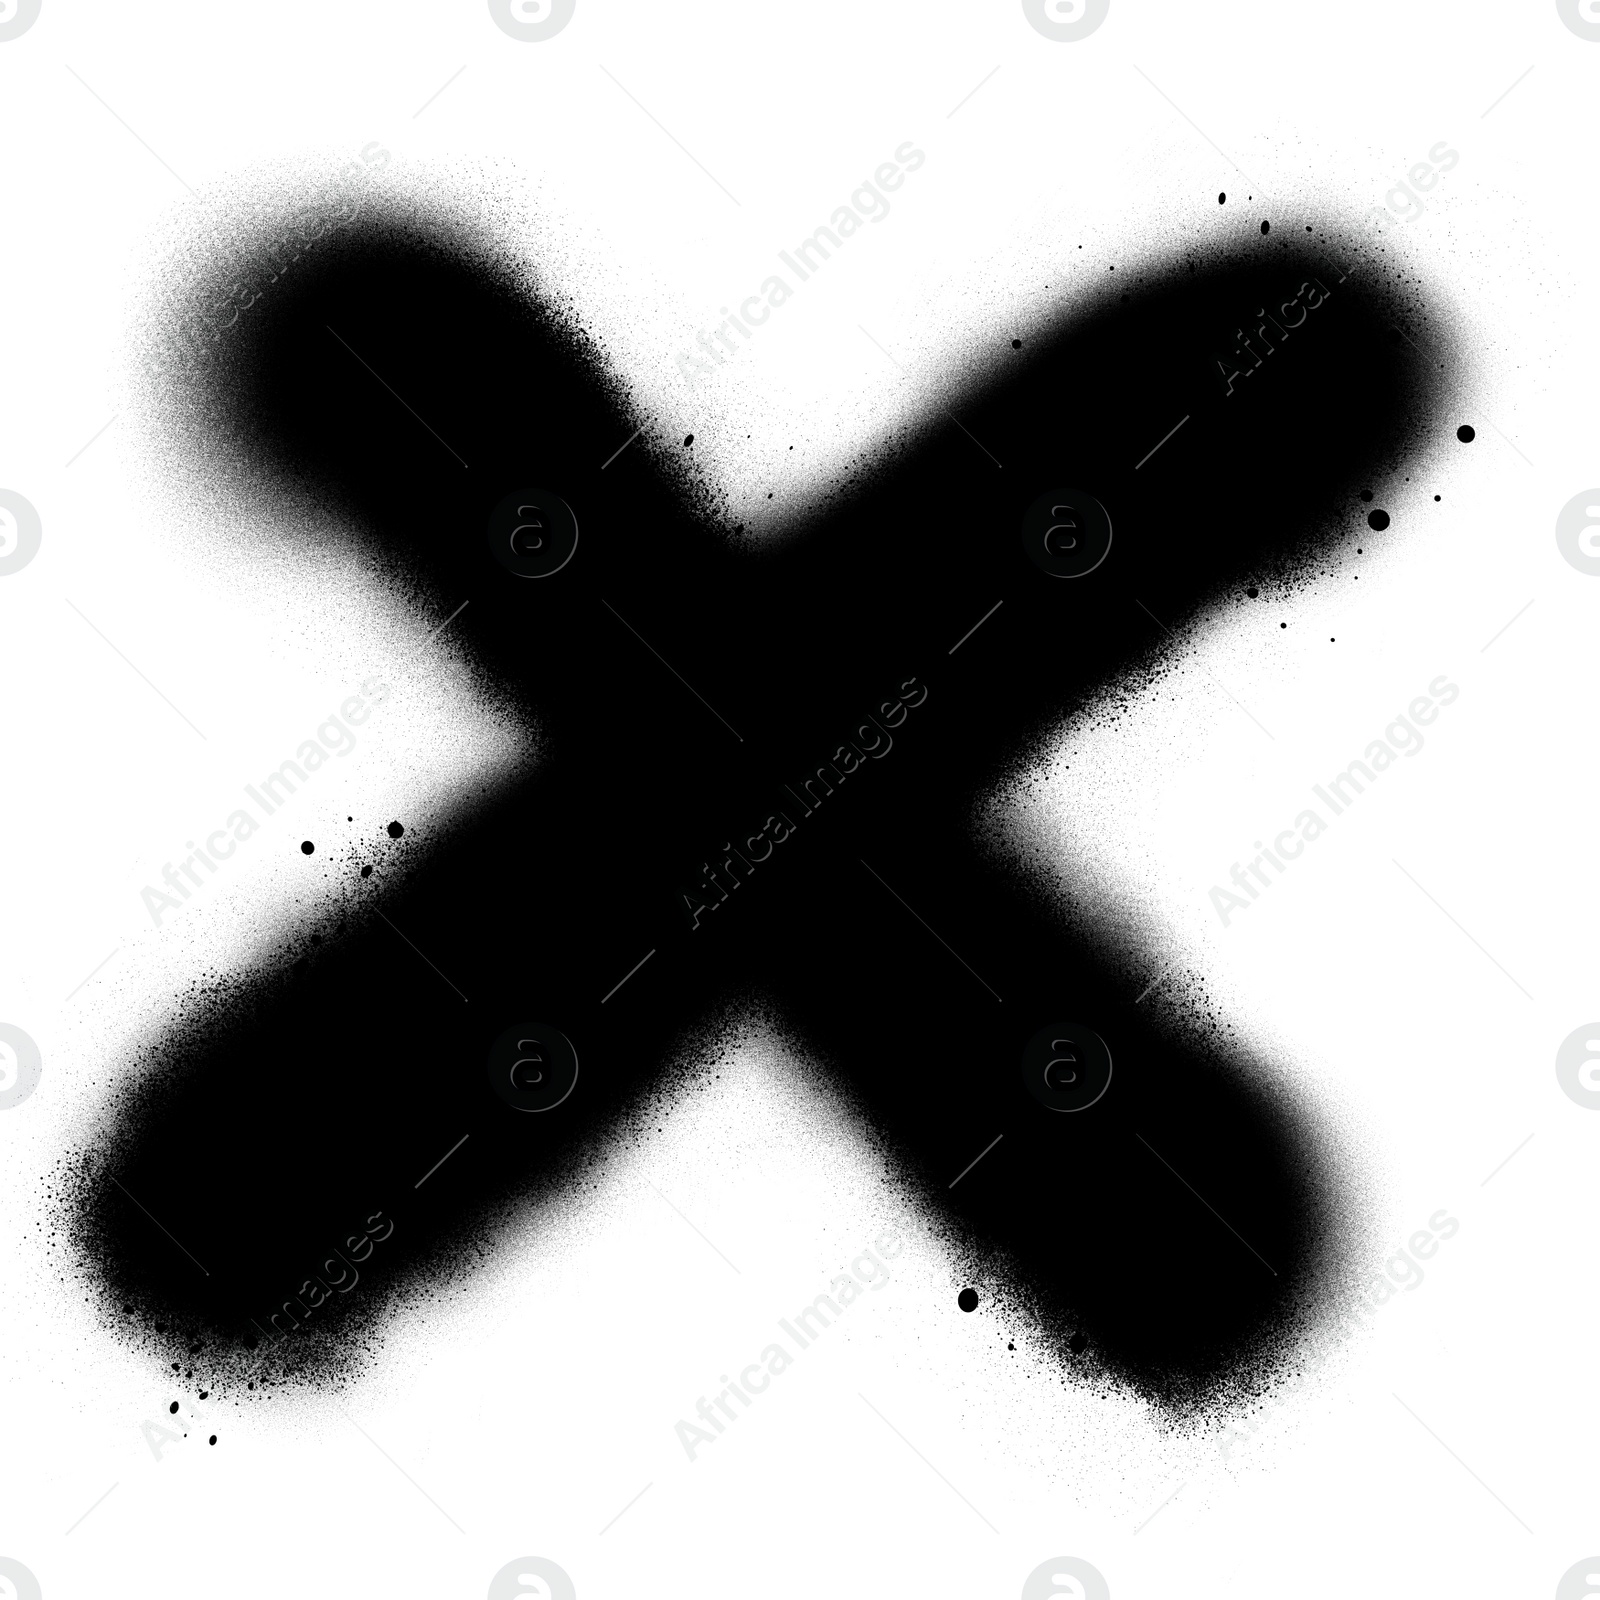 Illustration of Crossed lines drawn by black spray paint on white background